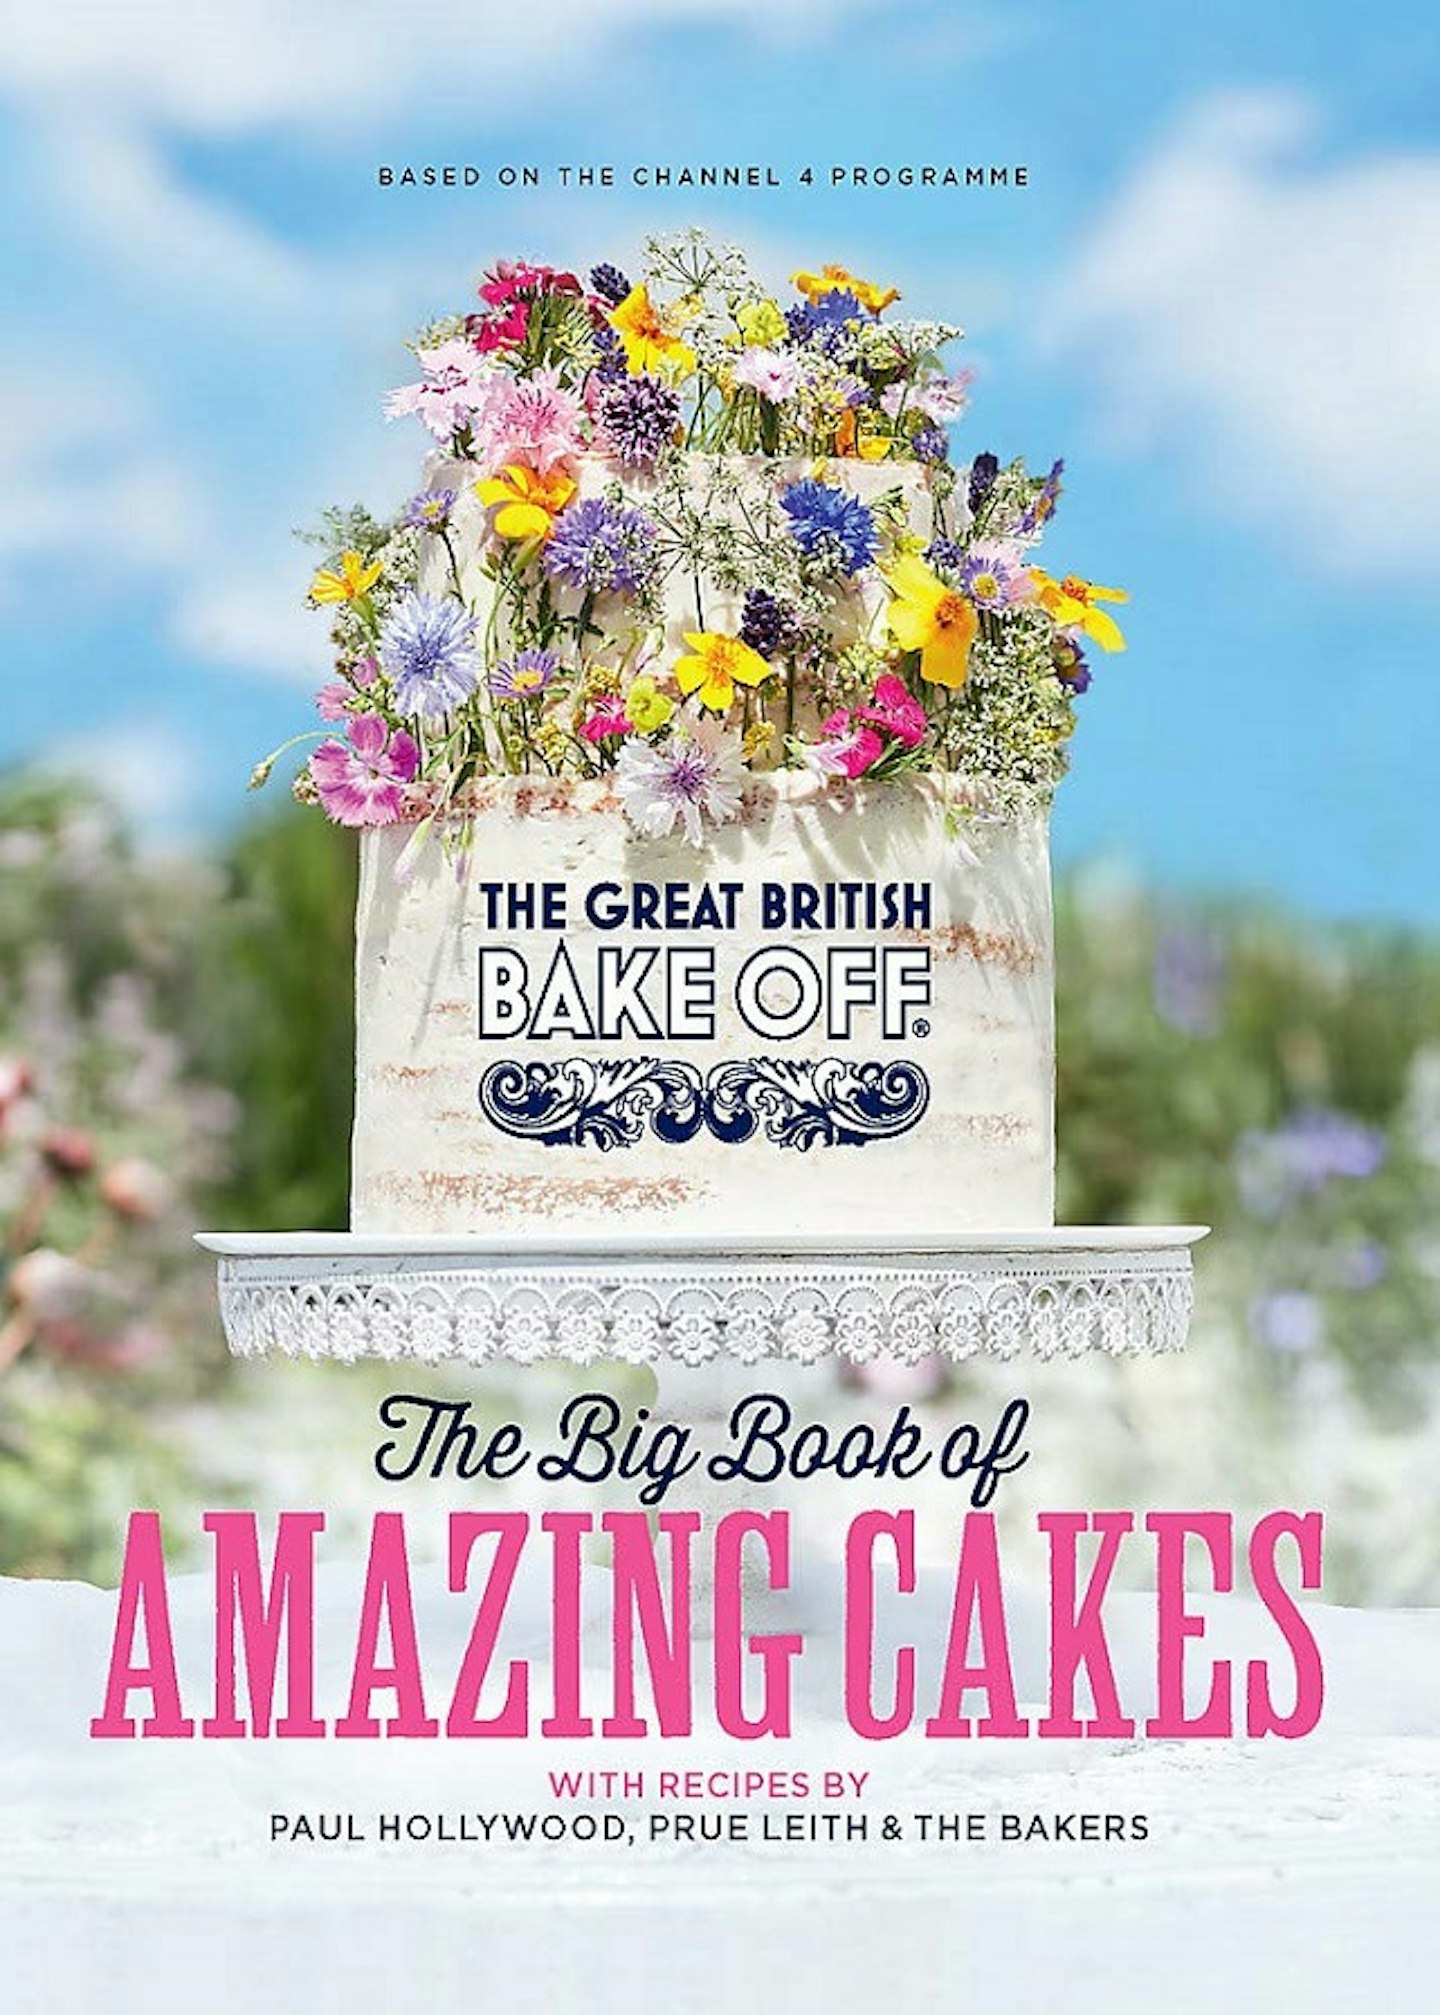 The Great British Bake Off: The Big Book of Amazing Cakes, 16.49